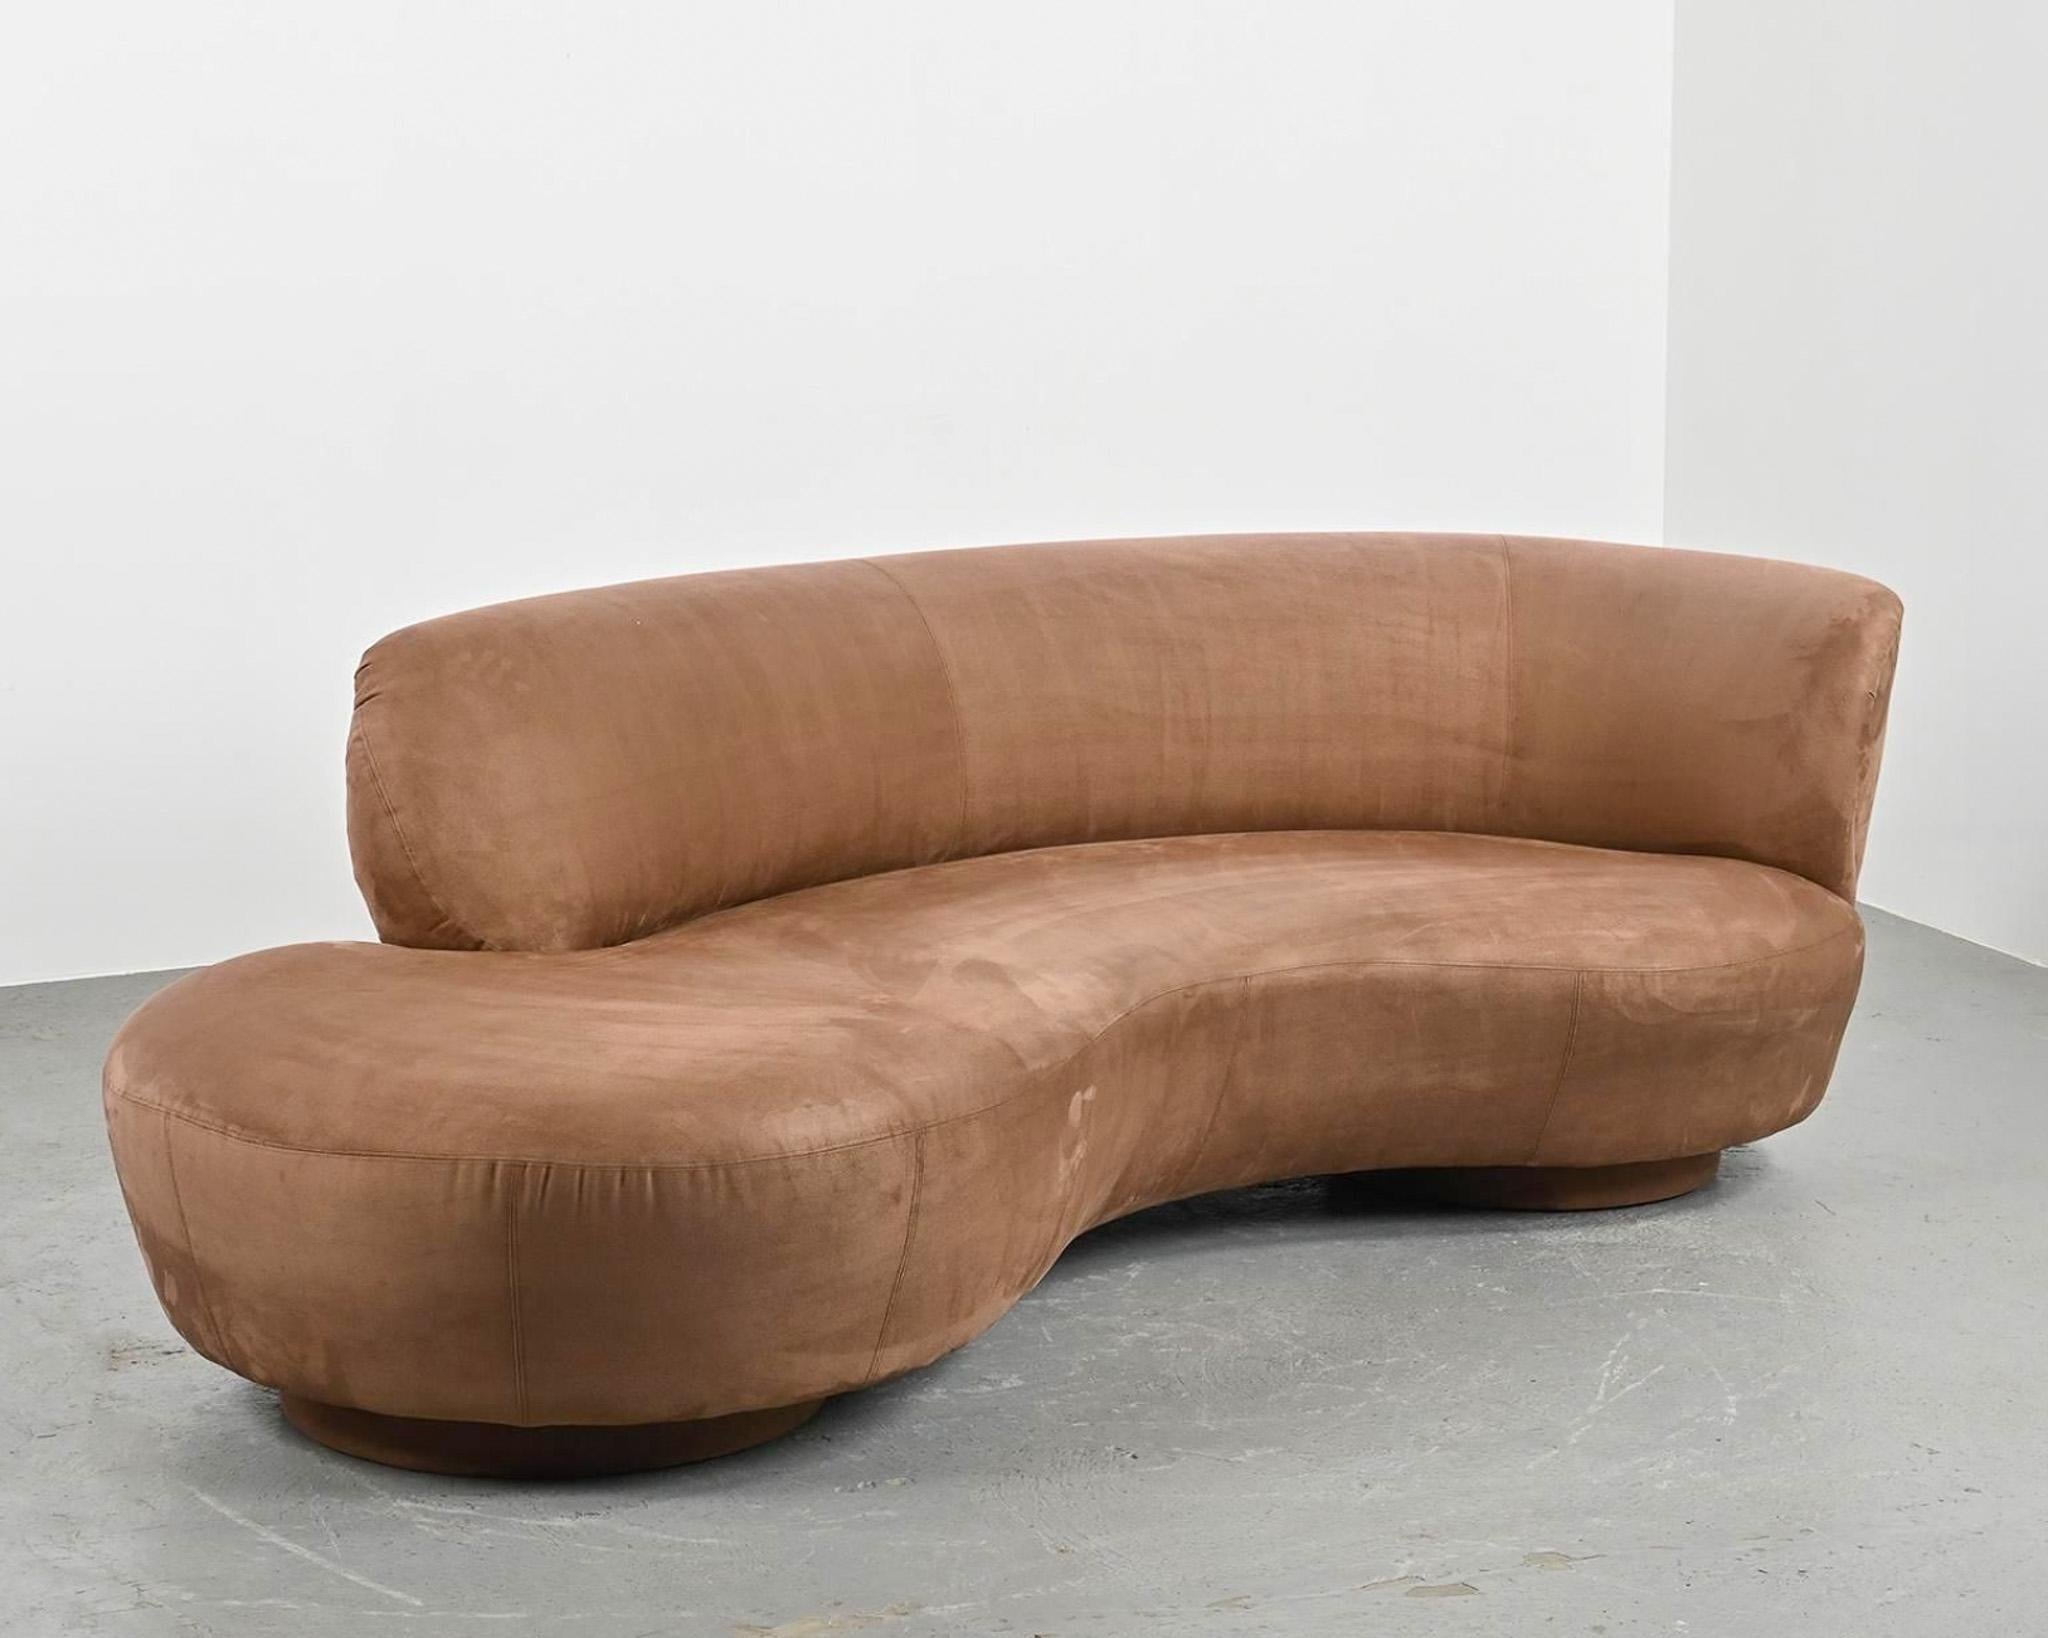 Rare and iconic free form sofa in style of Vladimir Kagan produced in the early 1990s. In good condition with suede upholstery. 